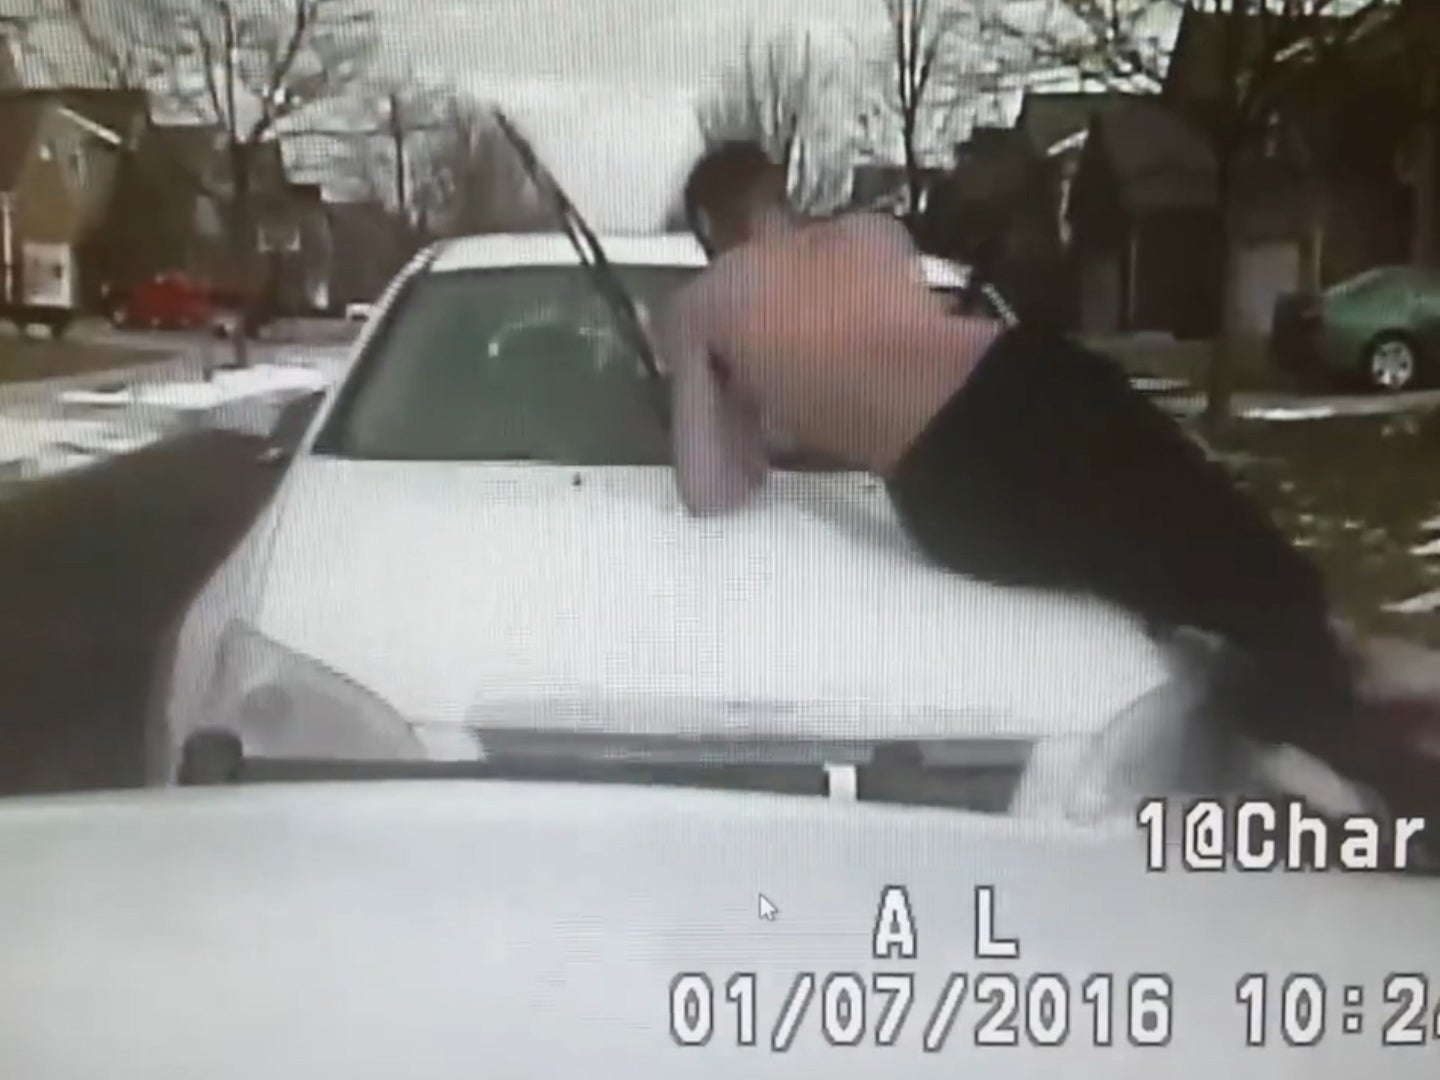 Video shows man clinging onto car bonnet as vehicle collides with police car in Michigan